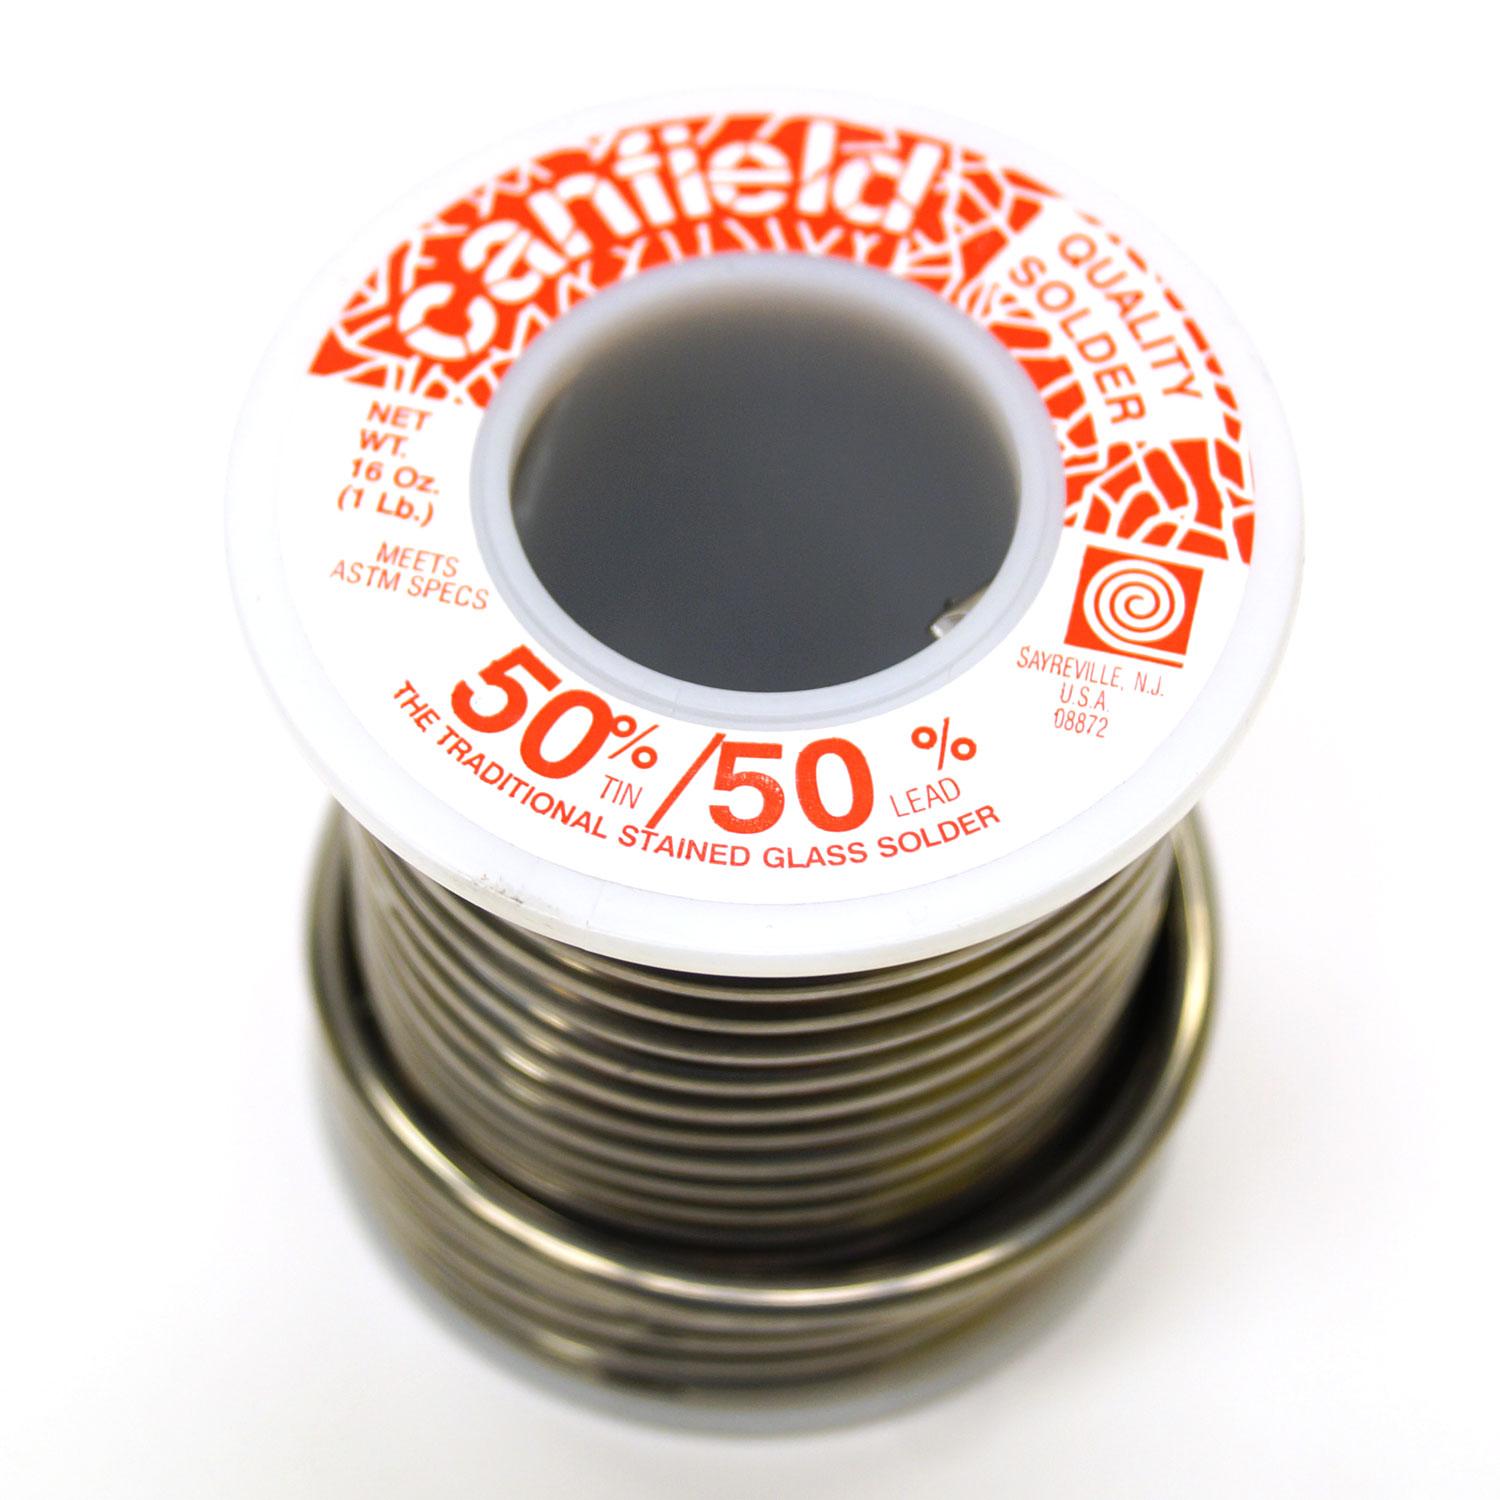 60/40 Solder for Stained Glass - $15.75 ea. / 1 lb. spools (50 Pack)